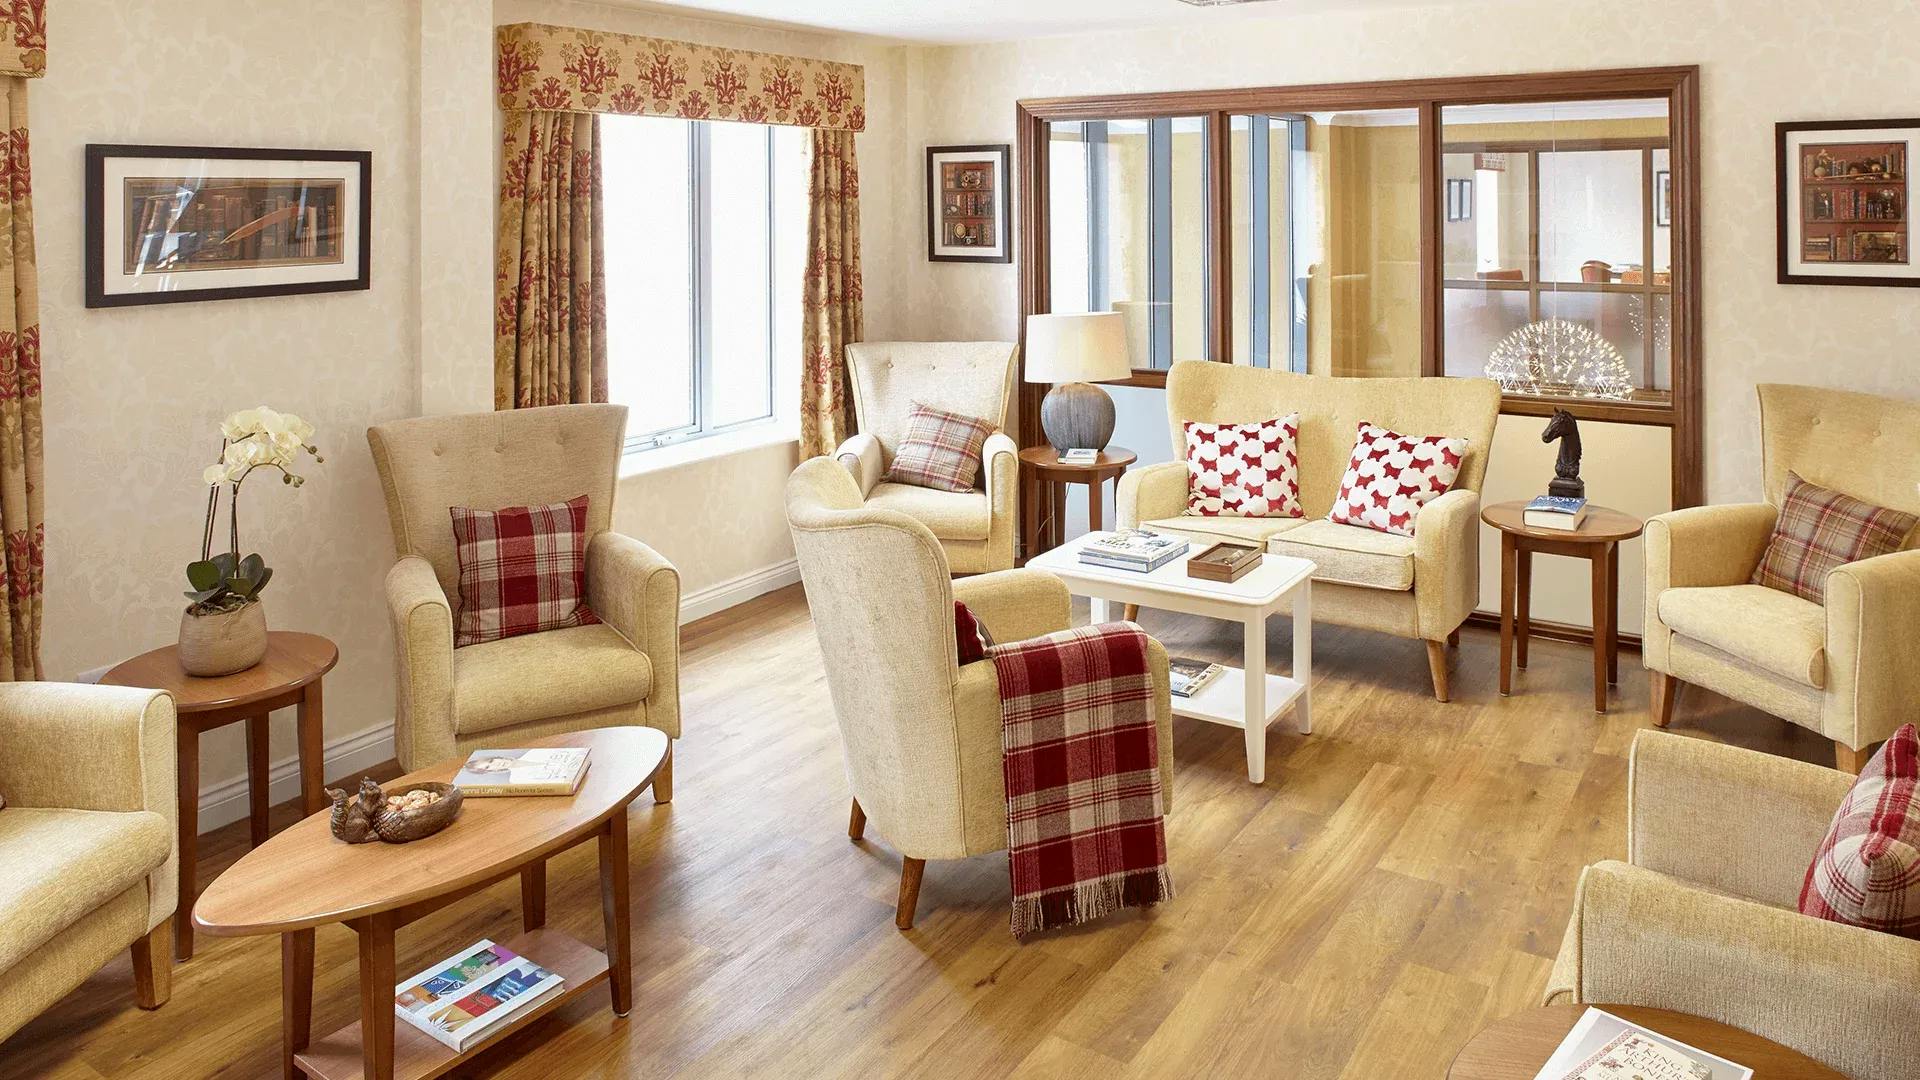 The communal area at Hawthorns Aldridge Care Home in Walsall, Staffordshire